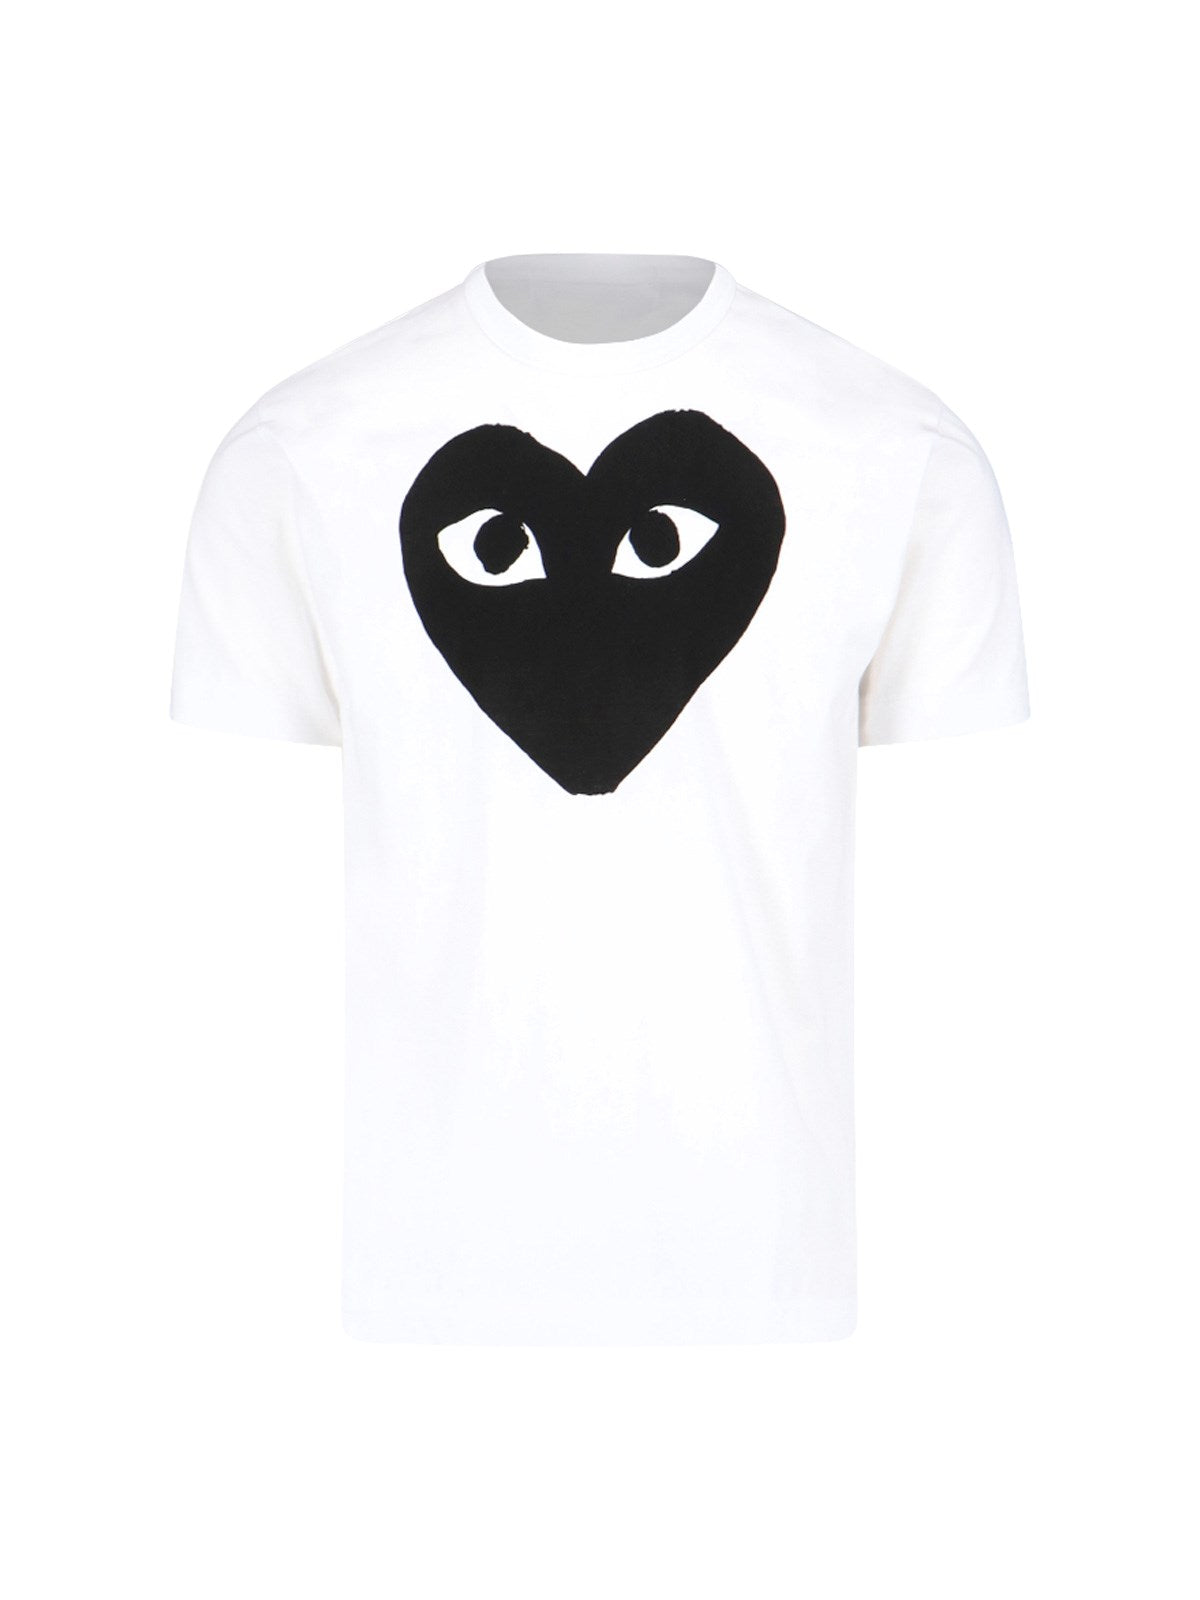 comme des garcons play t-shirt stampa cuore-Comme des Garçons Play- t-shirt Dresso